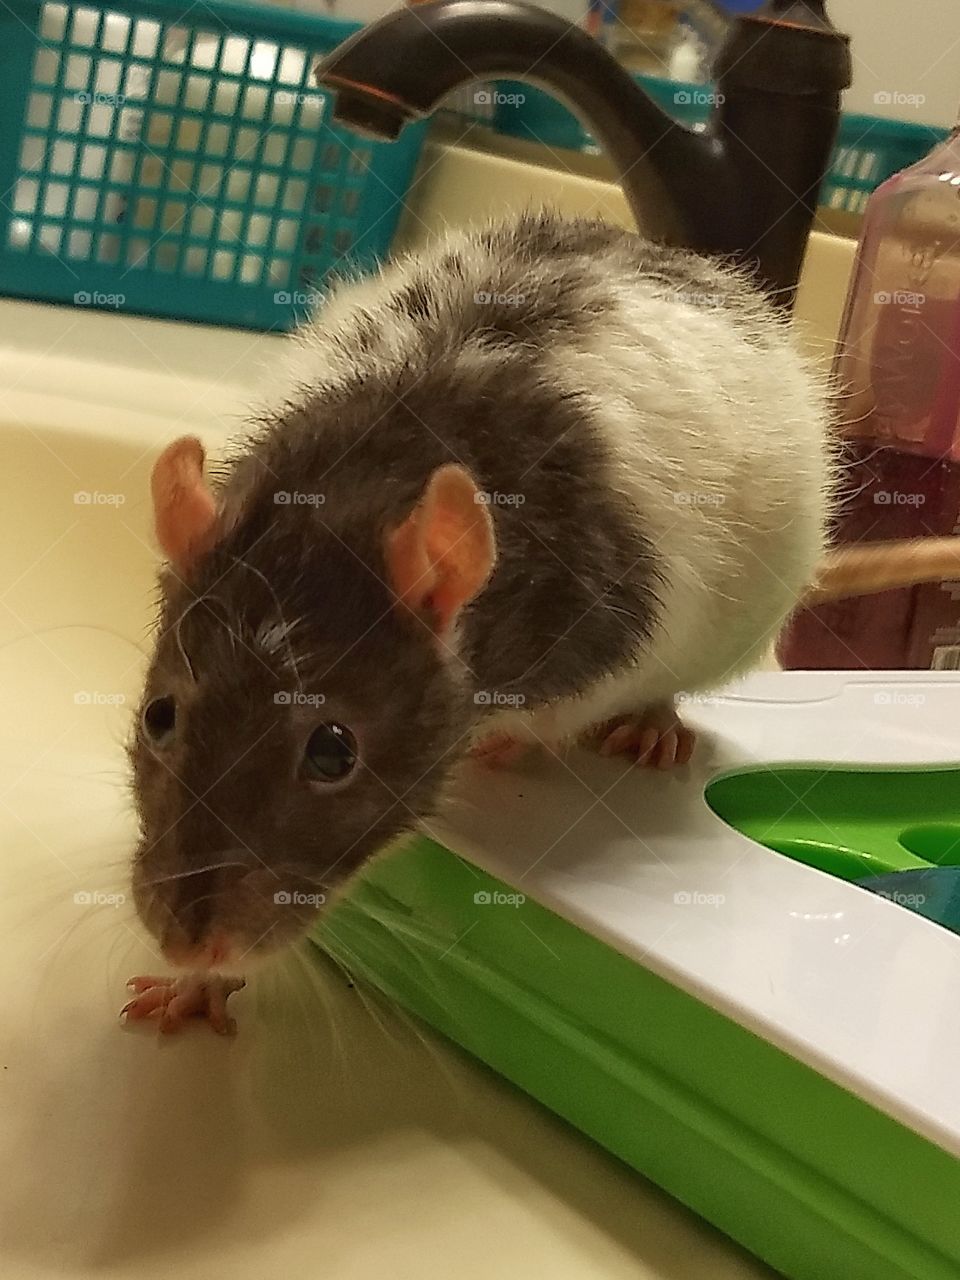 My rattie, Ellie May, playing on the bathroom counter.